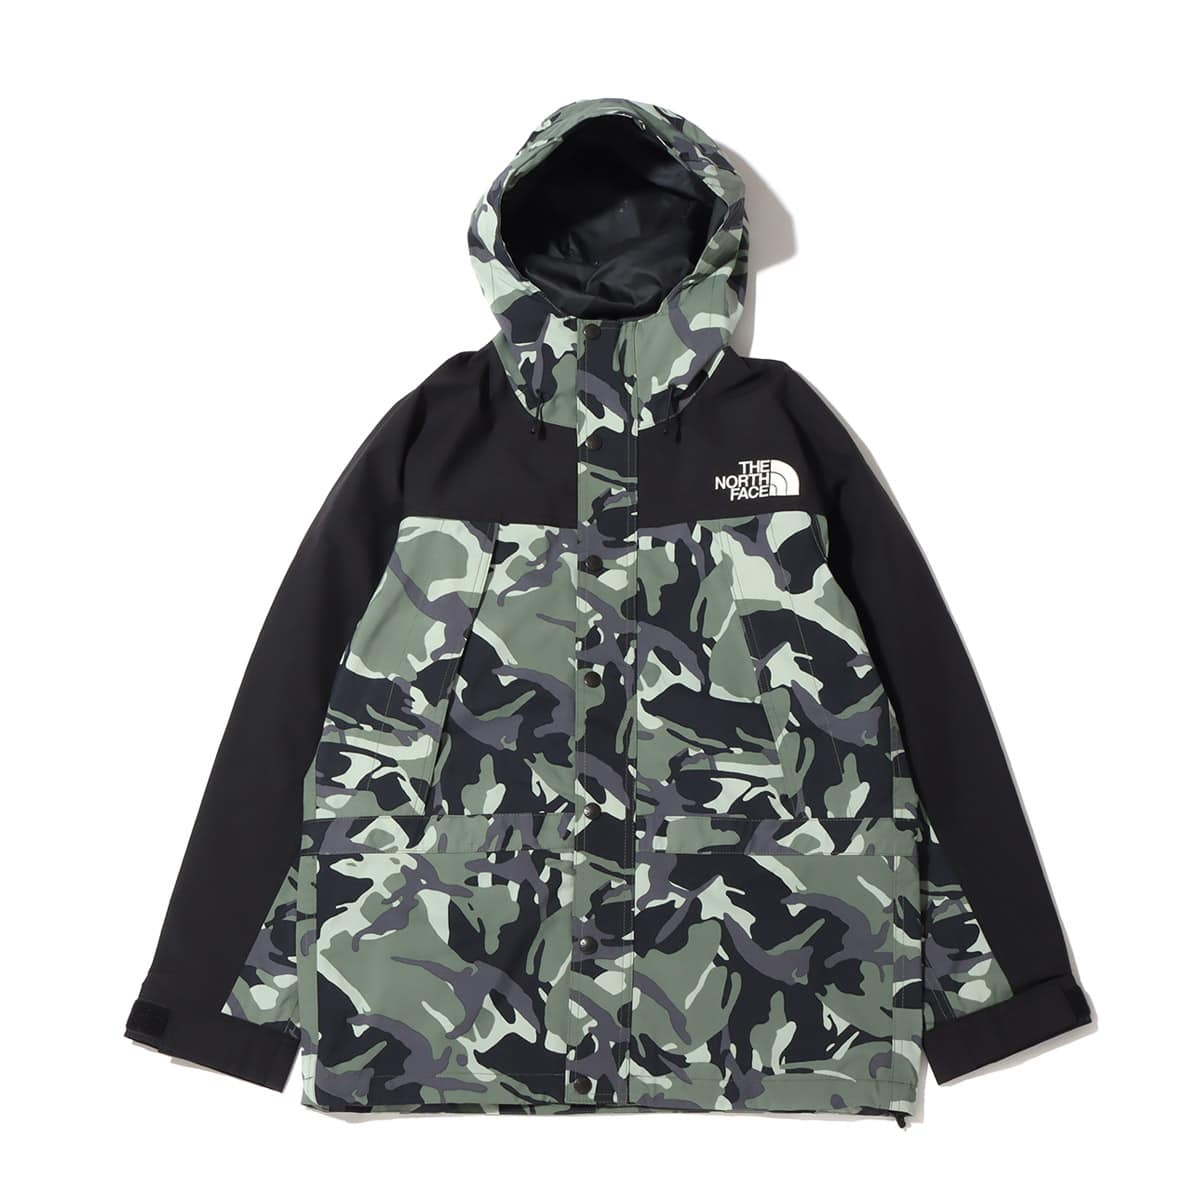 THE NORTH FACE NOVELTY MOUNTAIN LIGHT JACKET ローレルリース 